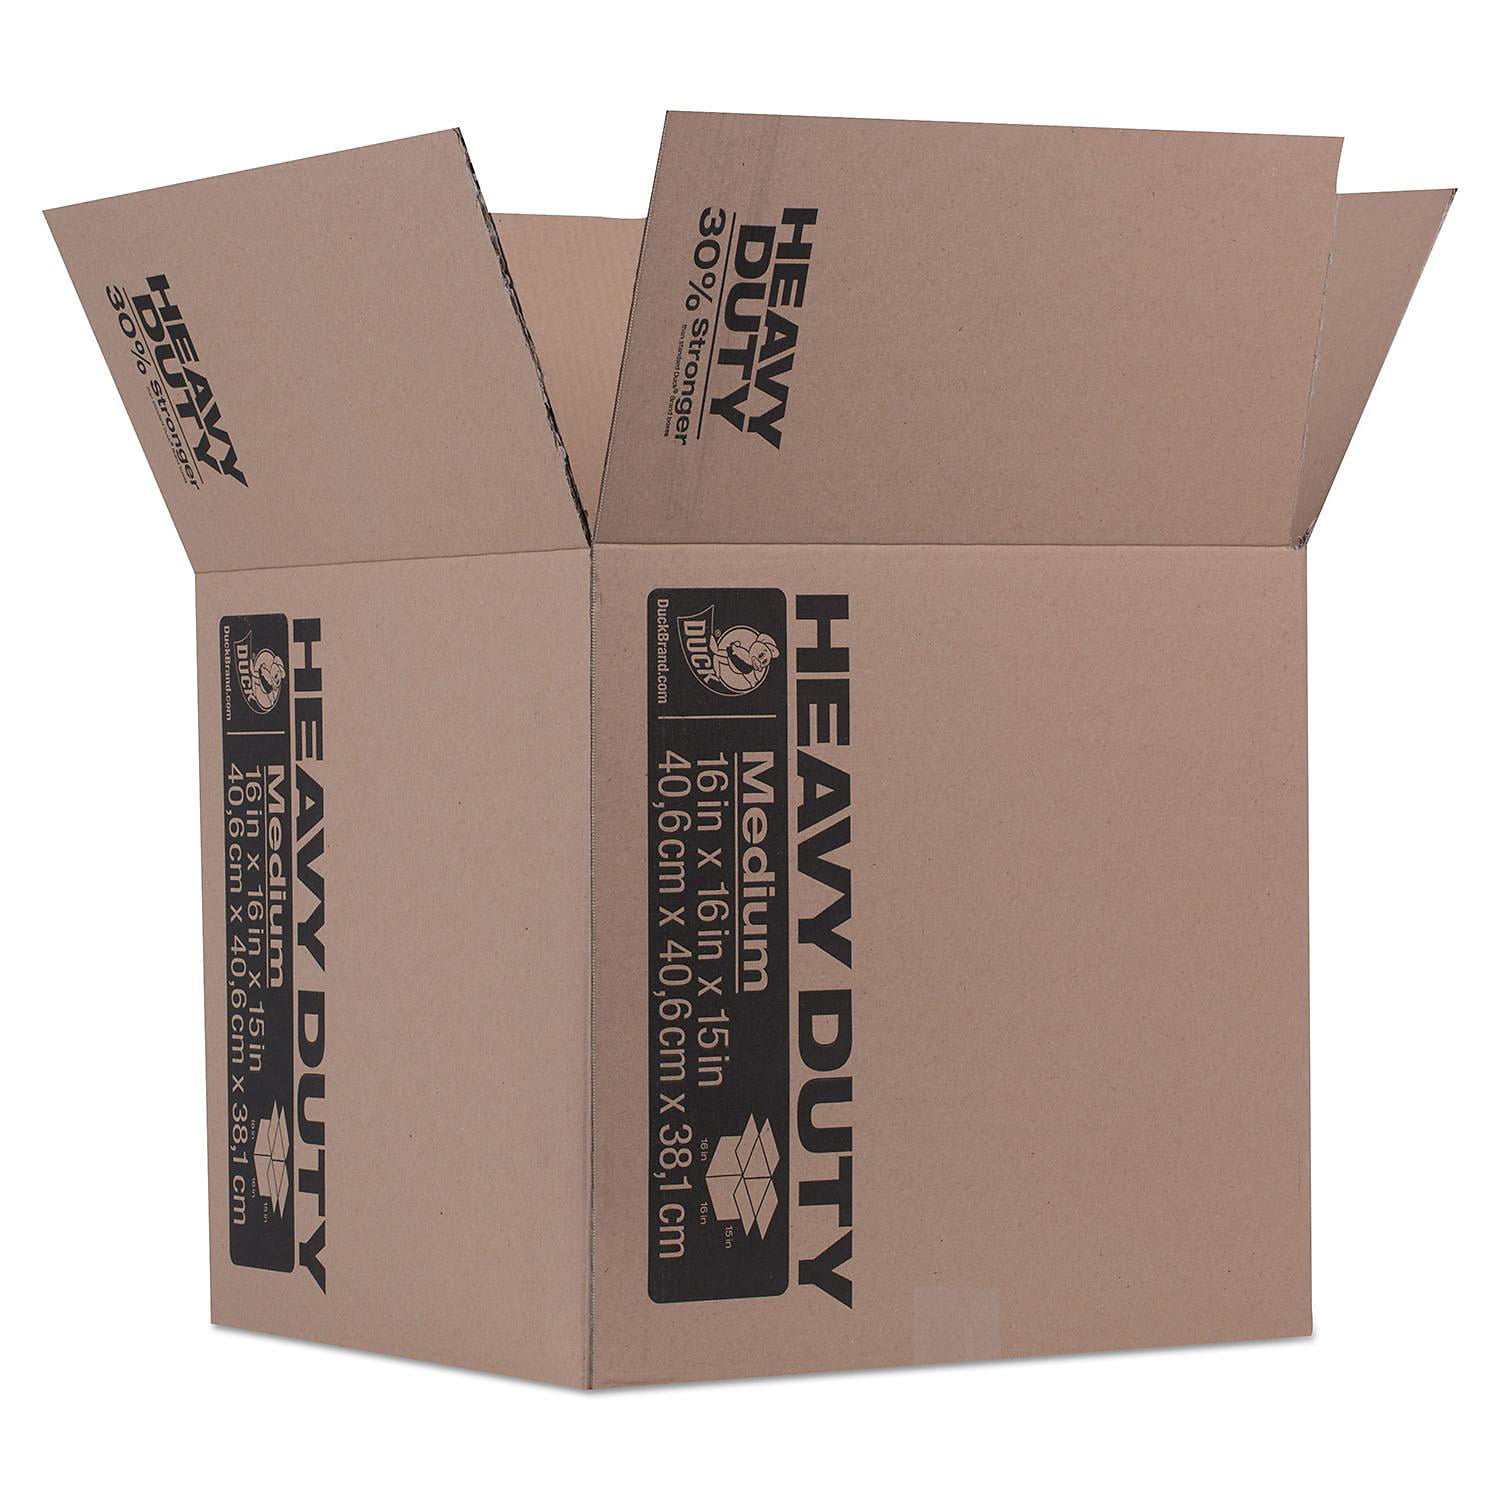 15 LARGE D/W CARDBOARD REMOVAL STORAGE BOXES 18x12x12" 